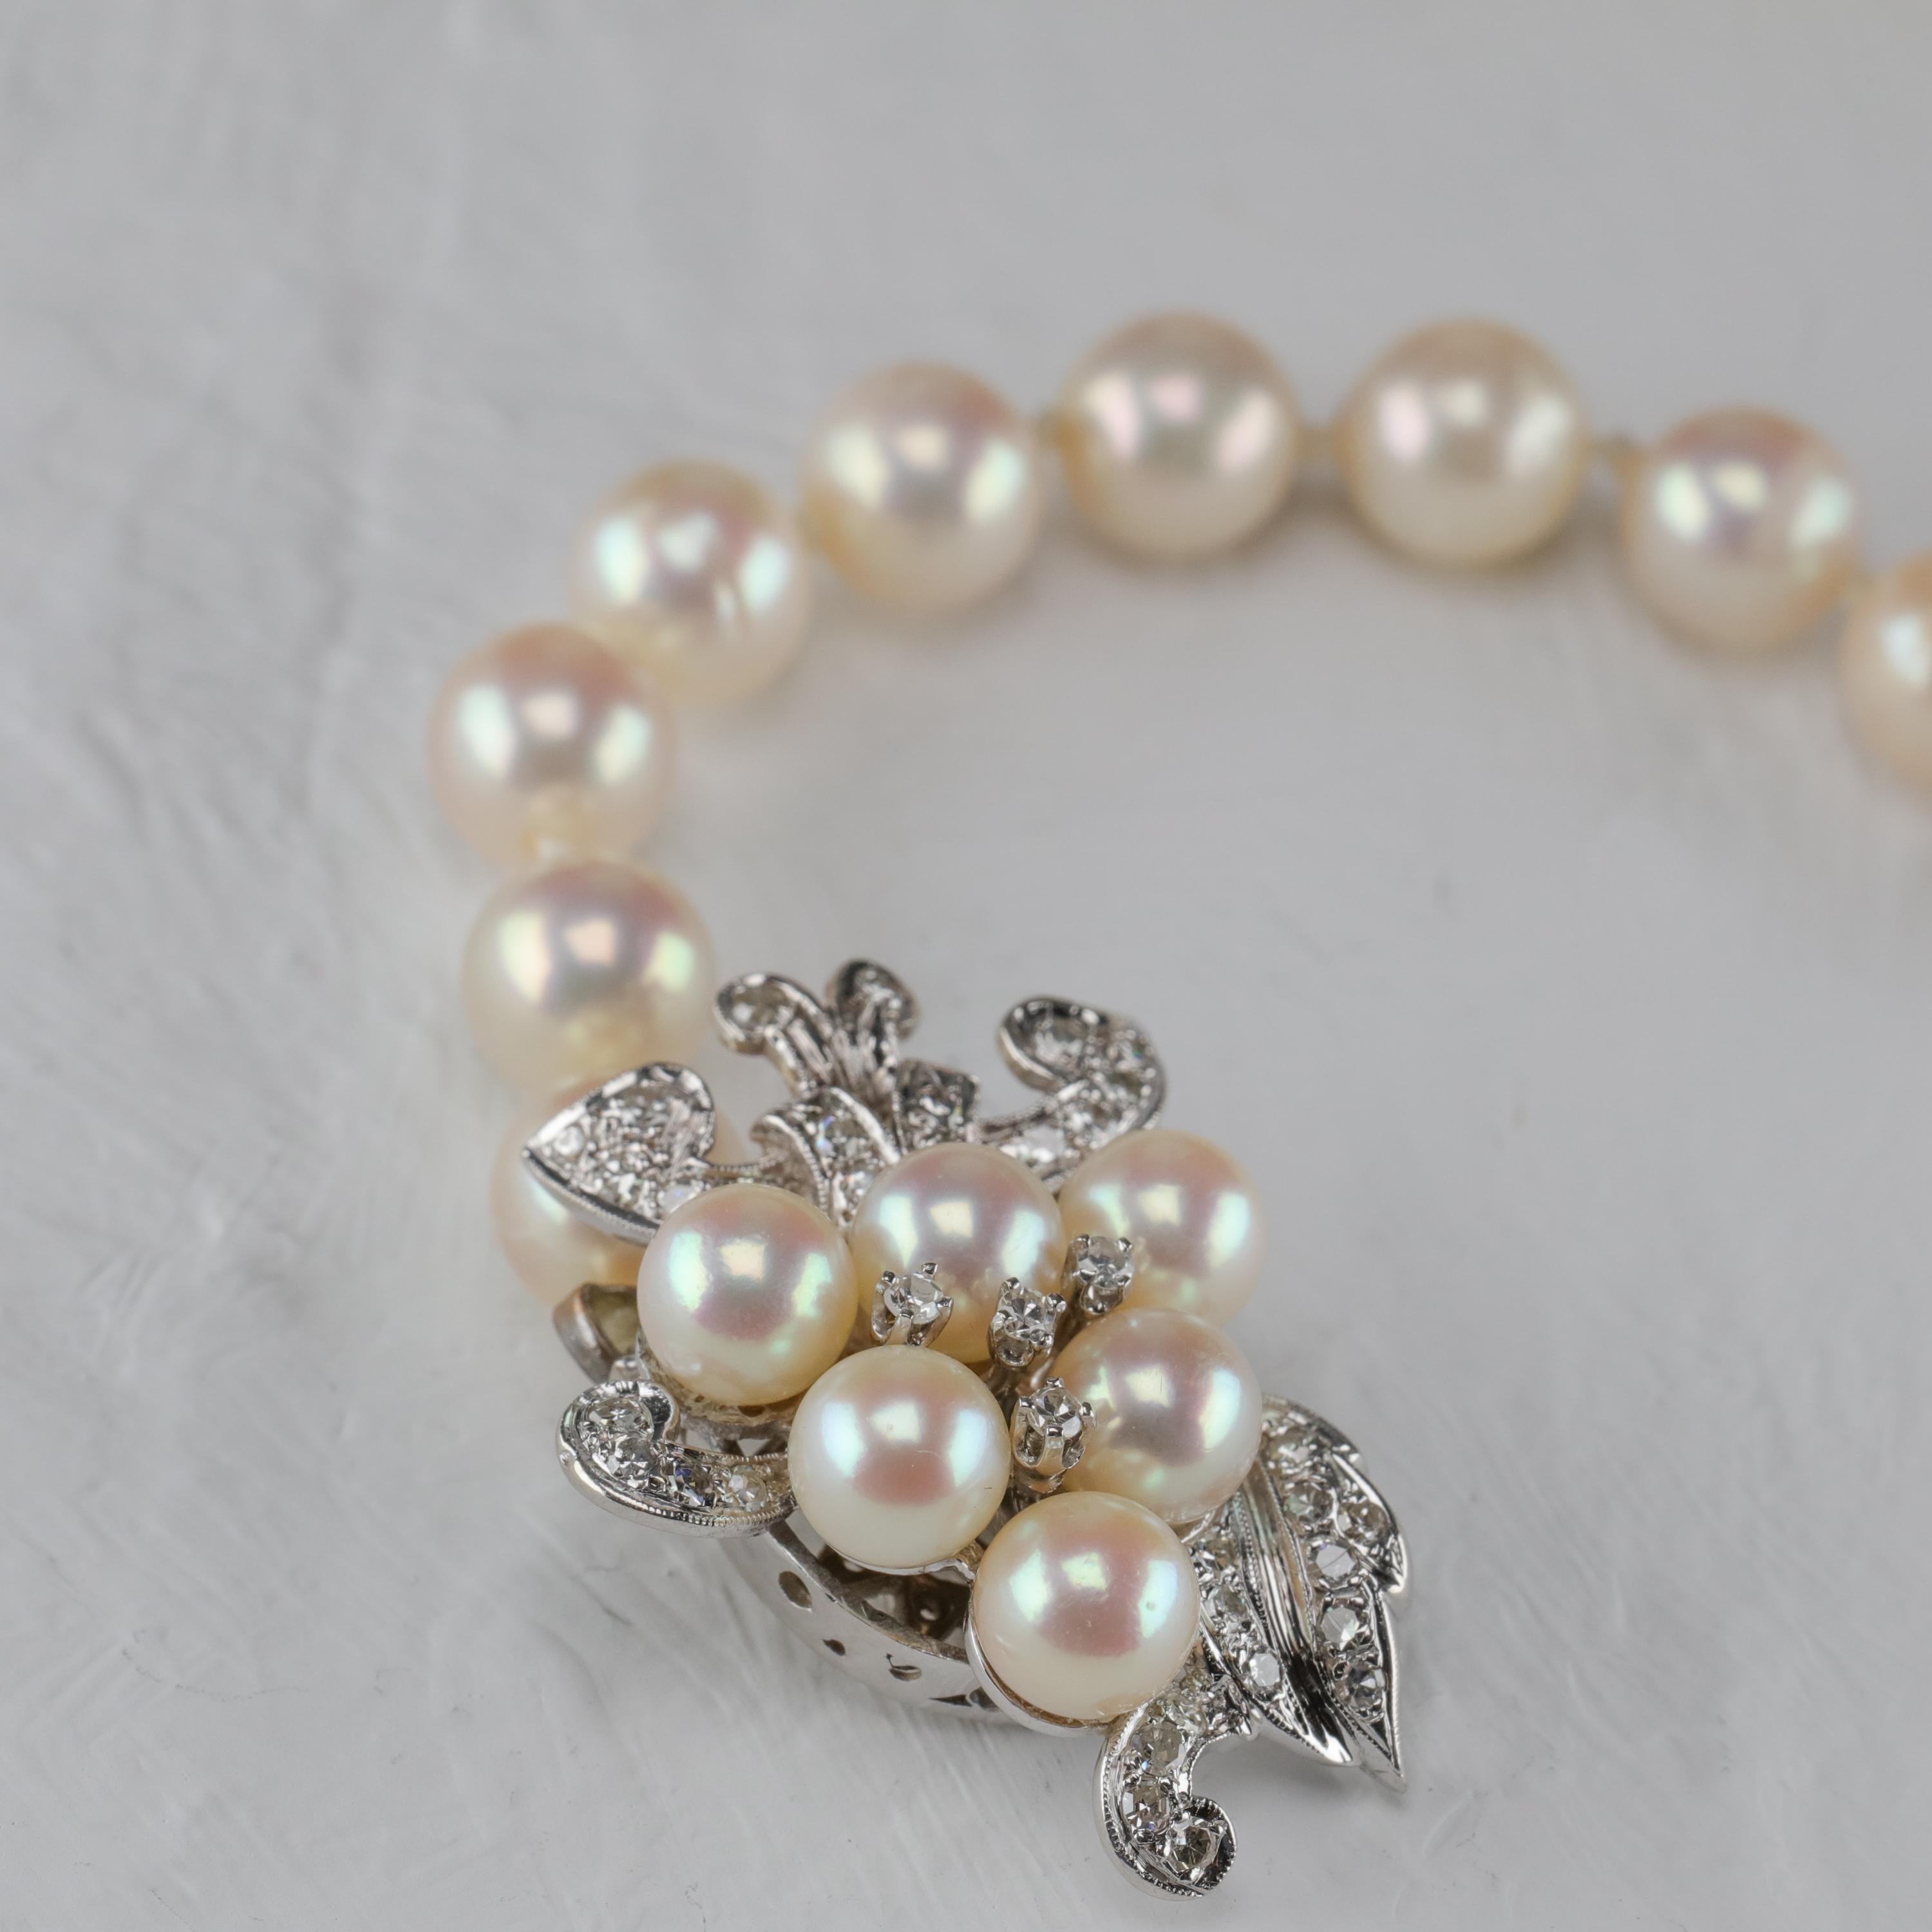 Akoya Pearl Necklace with Diamond Clasp Midcentury 1